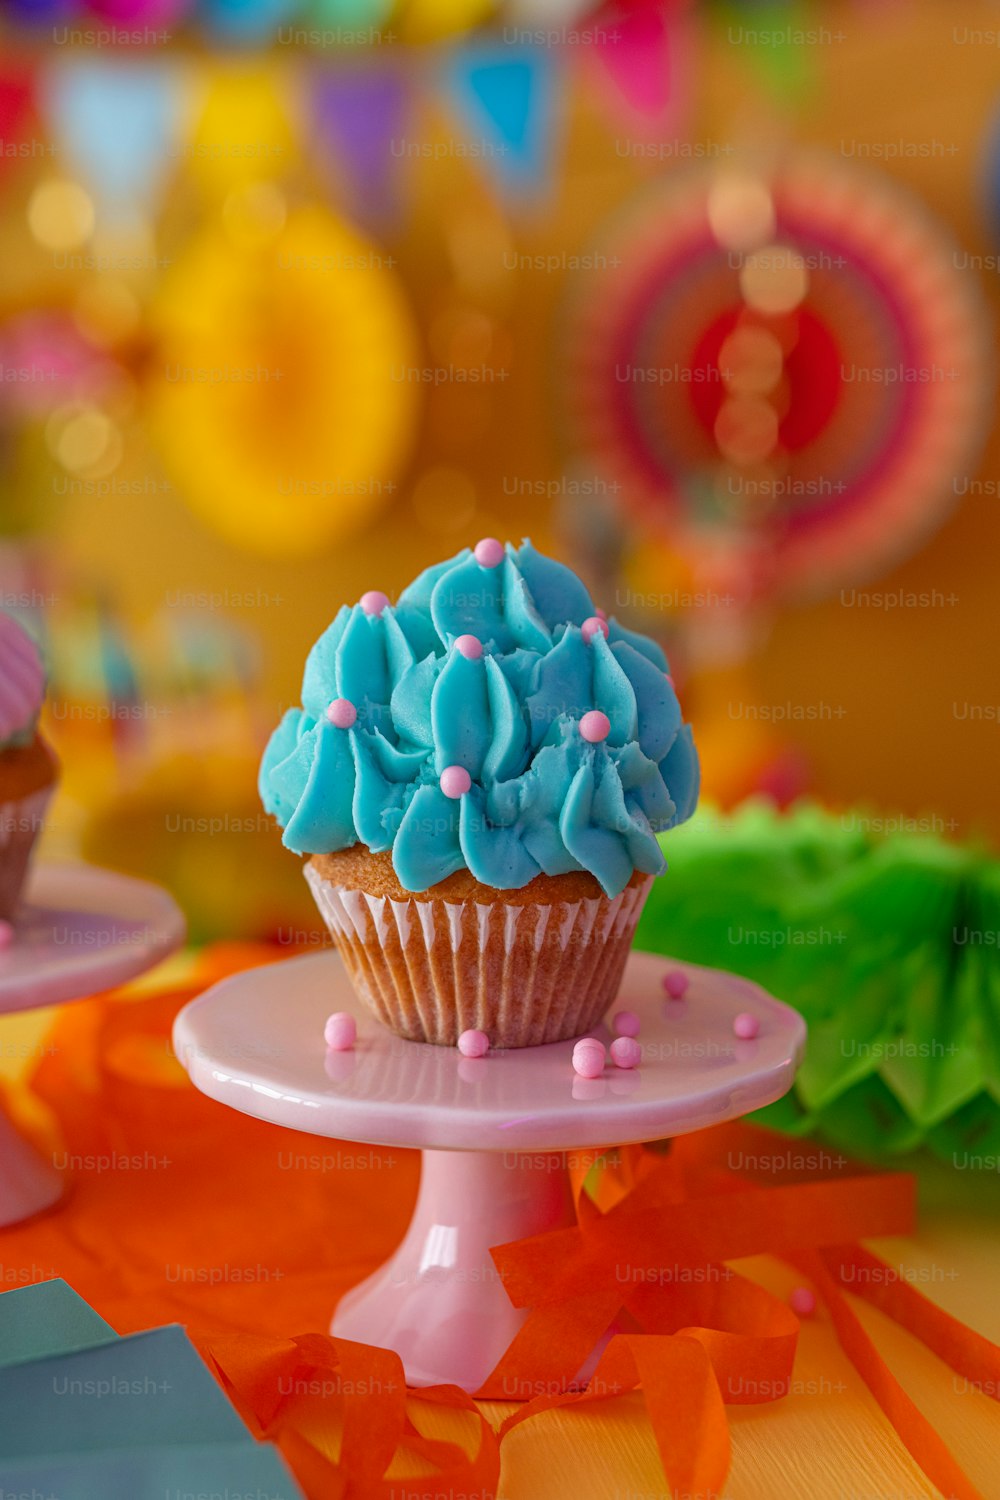 a cupcake with blue frosting and sprinkles on a plate